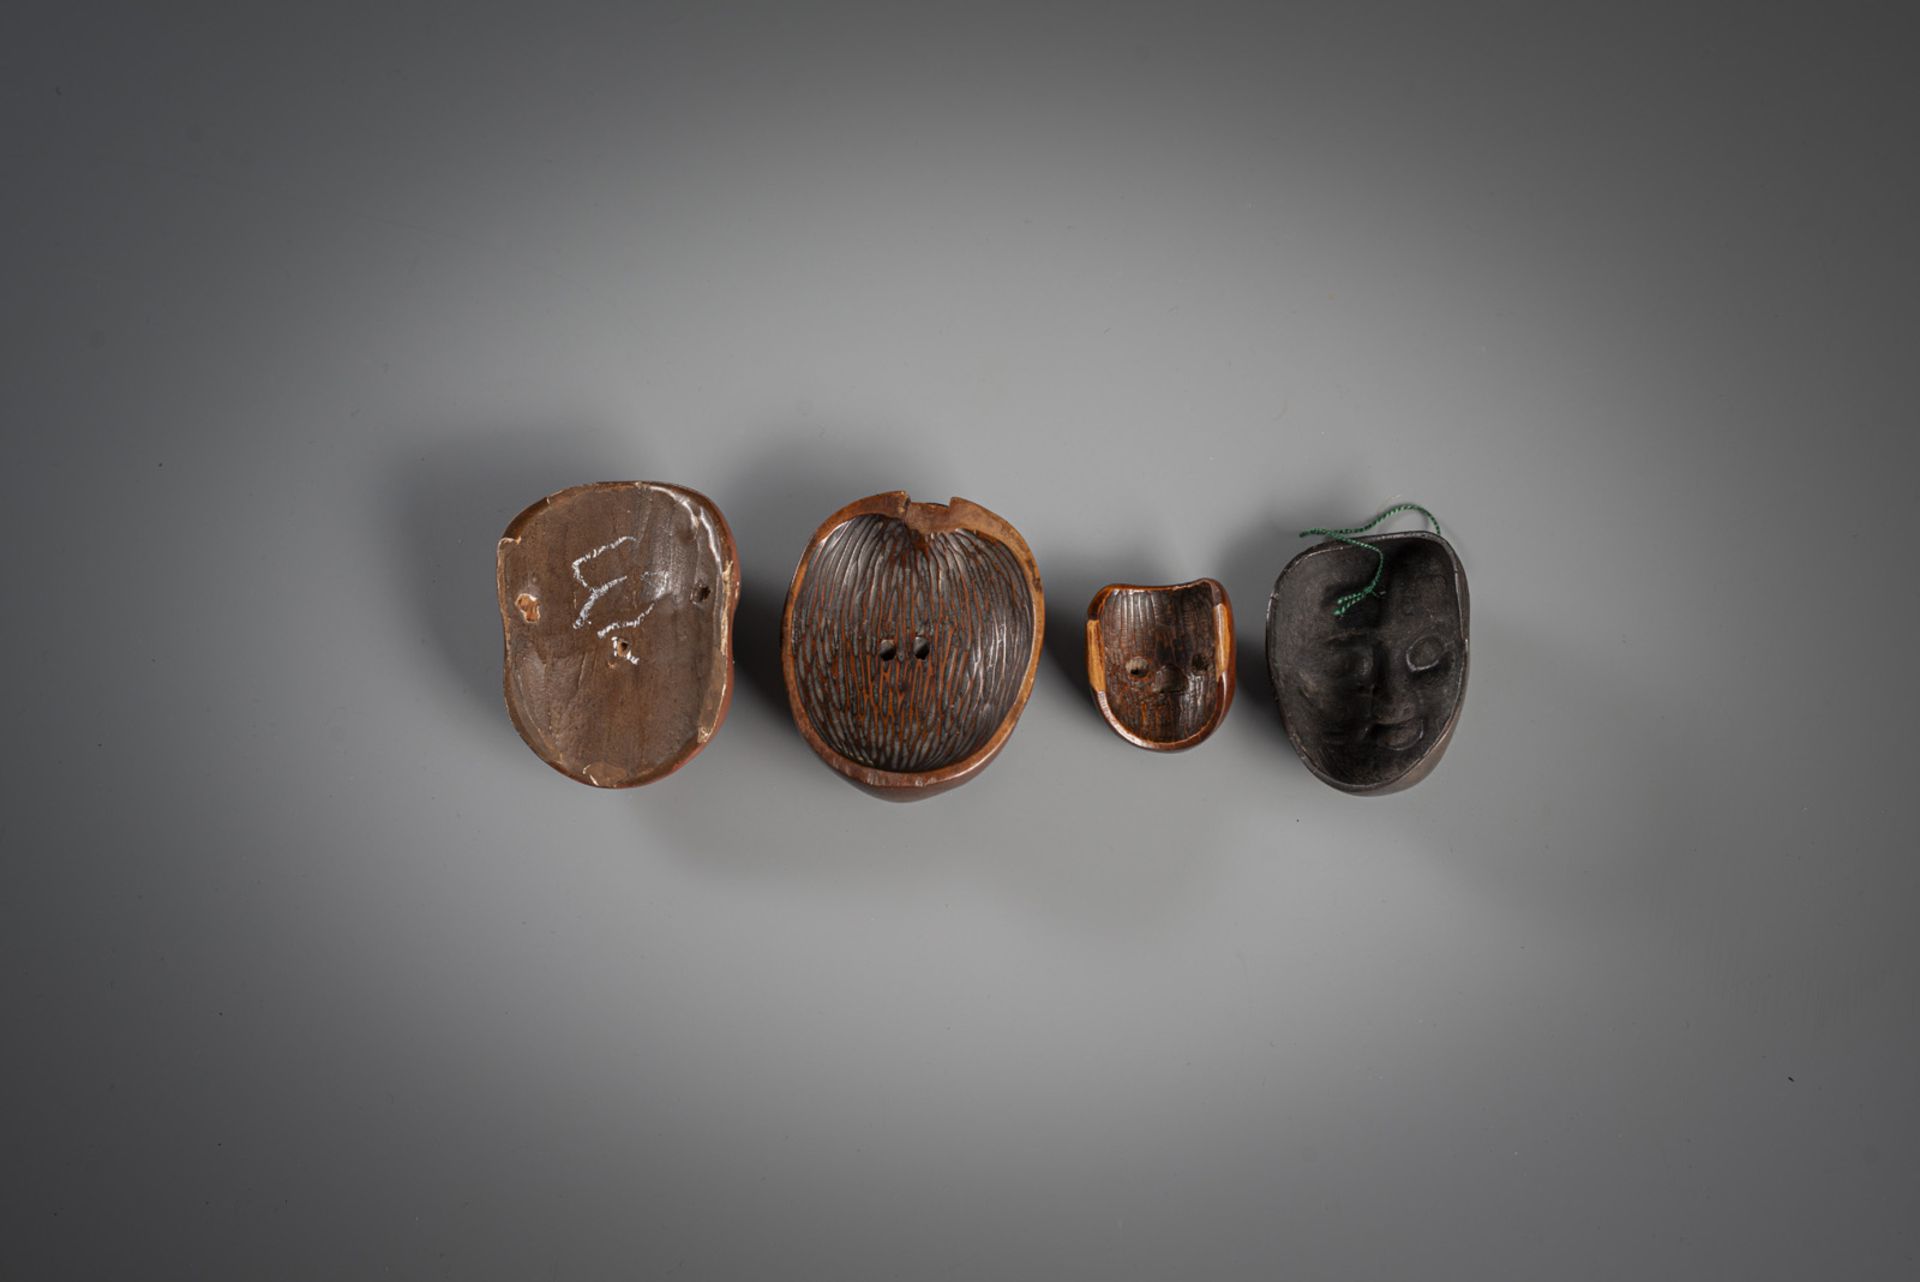 FOUR SMALL MASKS AMONG OTHERS TWO NETSUKE MADE OF WOOD, BRONZE AND CERAMIC - Image 2 of 2